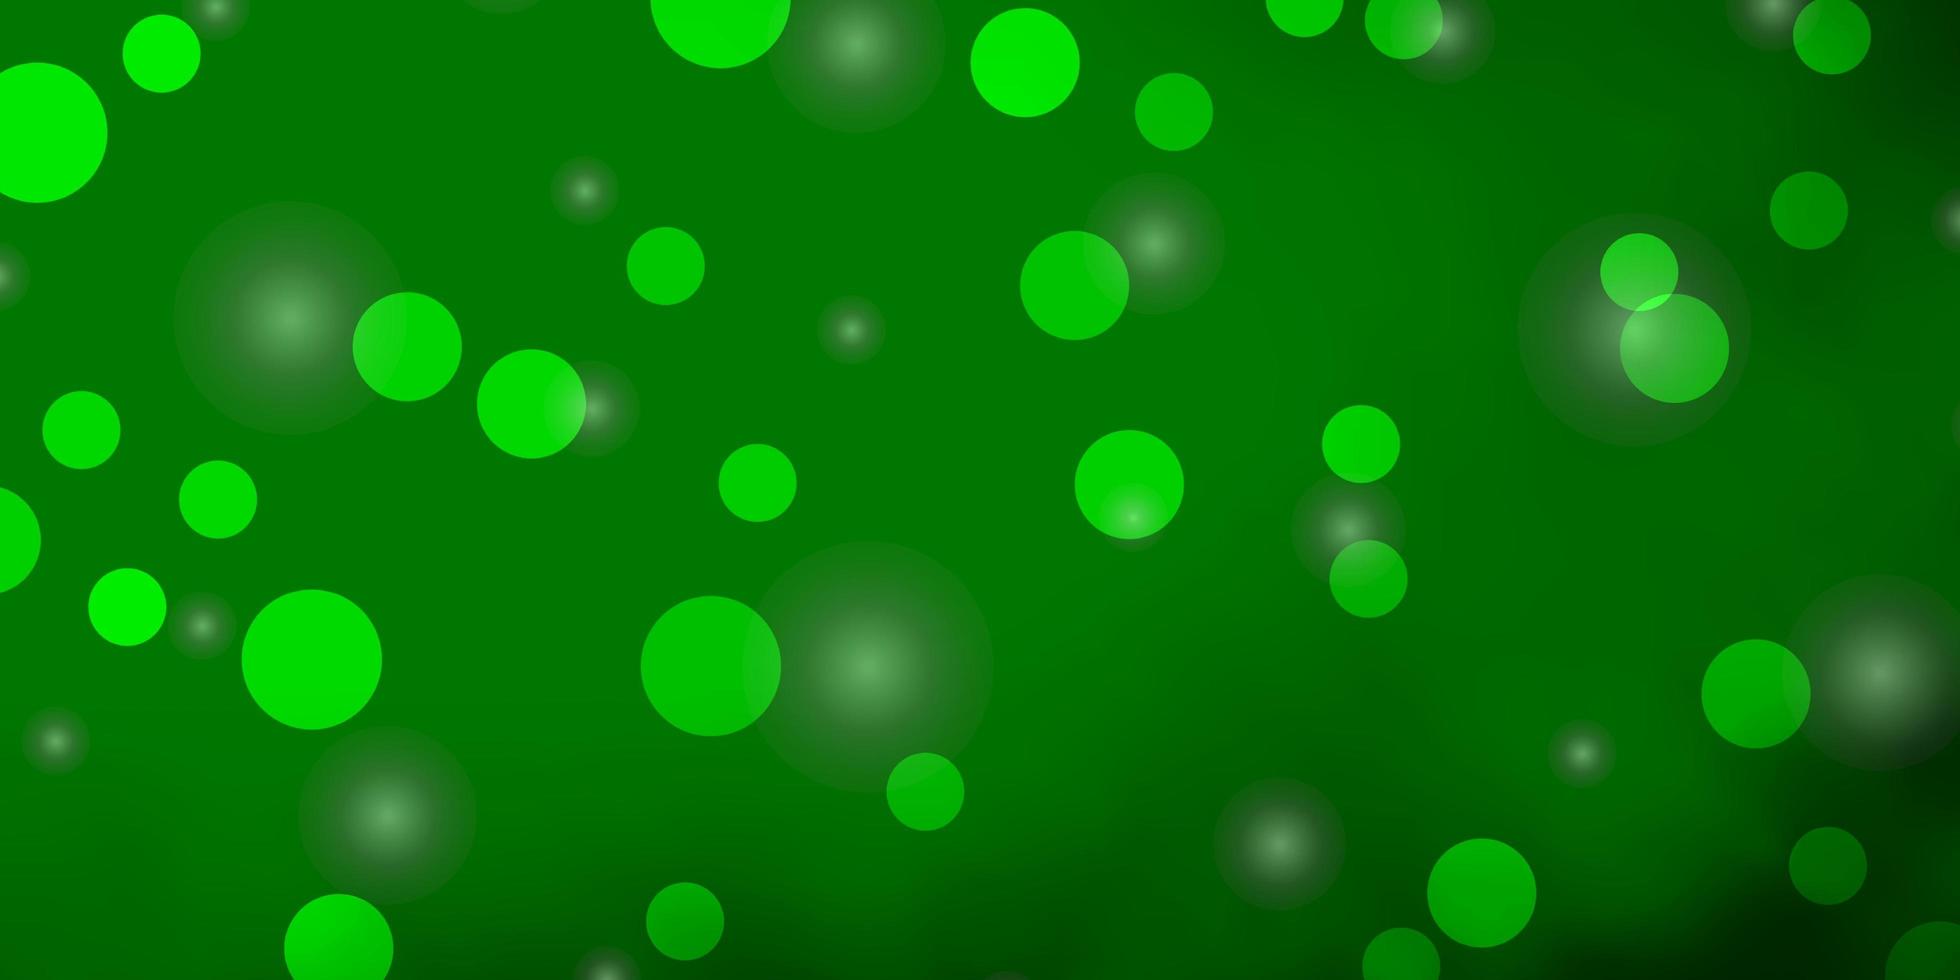 Light Green vector background with circles stars Colorful disks stars on simple gradient background Design for posters banners